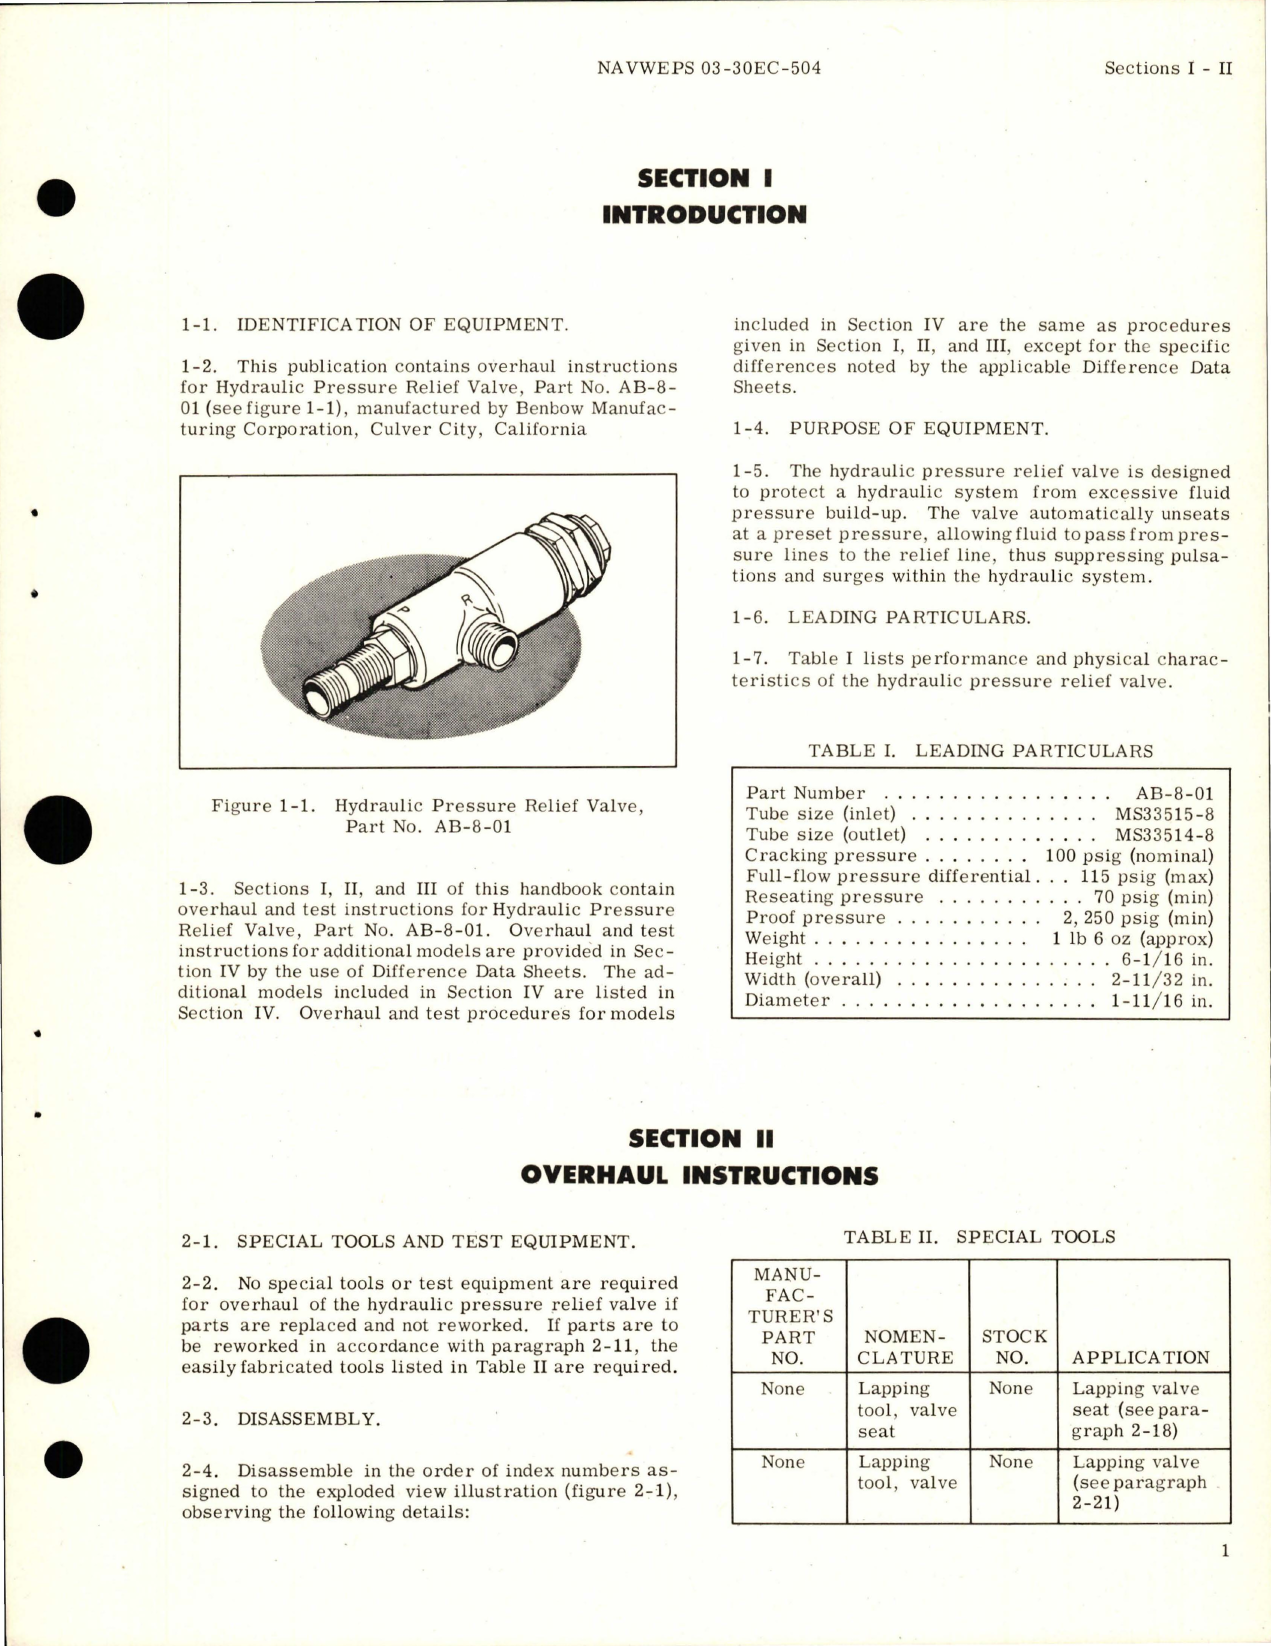 Sample page 5 from AirCorps Library document: Overhaul Instructions for Hydraulic Pressure Relief Valves - Parts AB-8-01, AB-8-02, AB-8-02A, AB-8-03, and AB-68-04